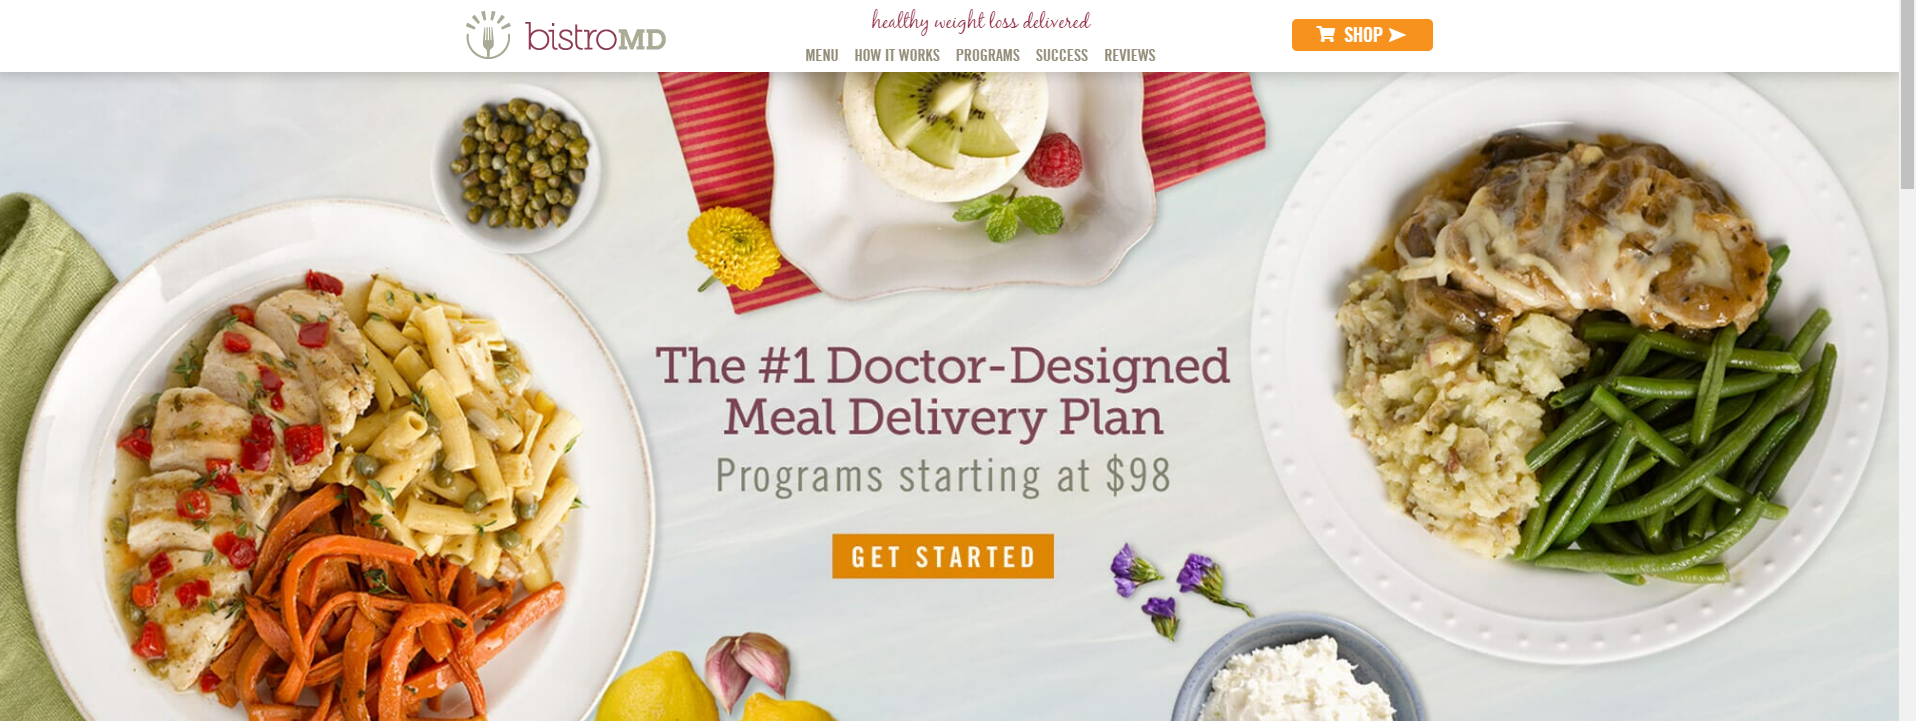 BistroMD: Healthy Weight Loss Delivered